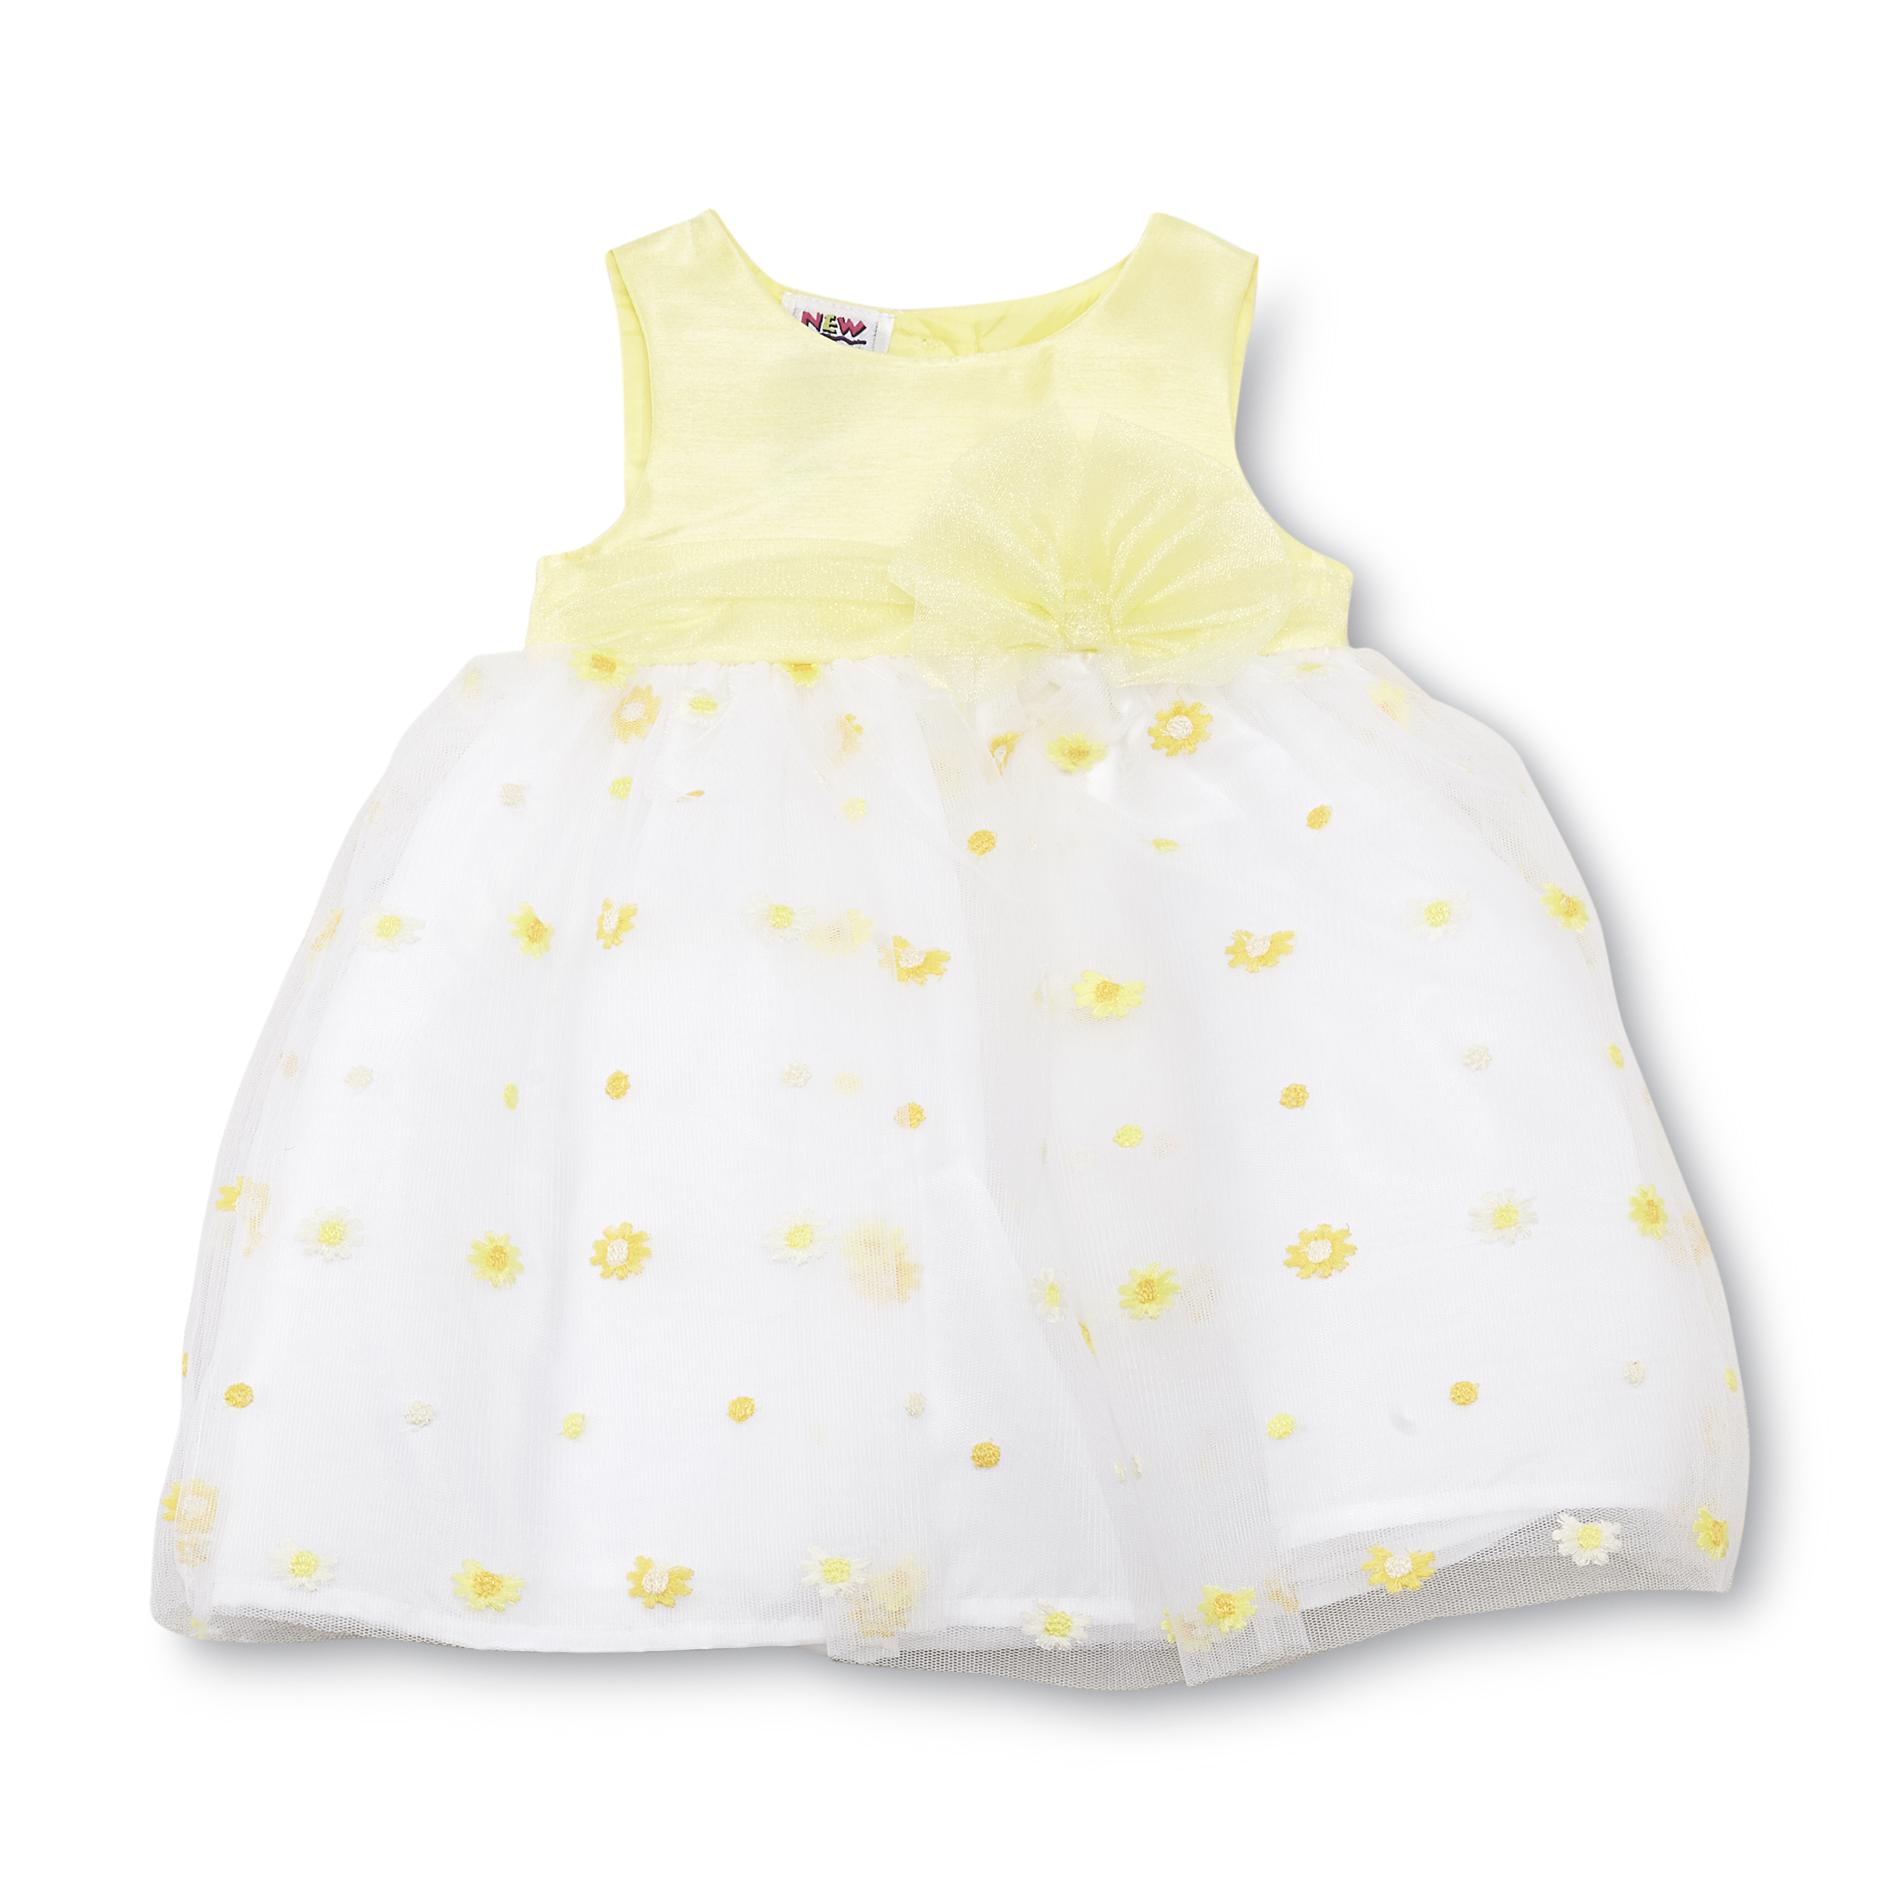 Holiday Editions Newborn Girl's Sleeveless Party Dress - Daisies